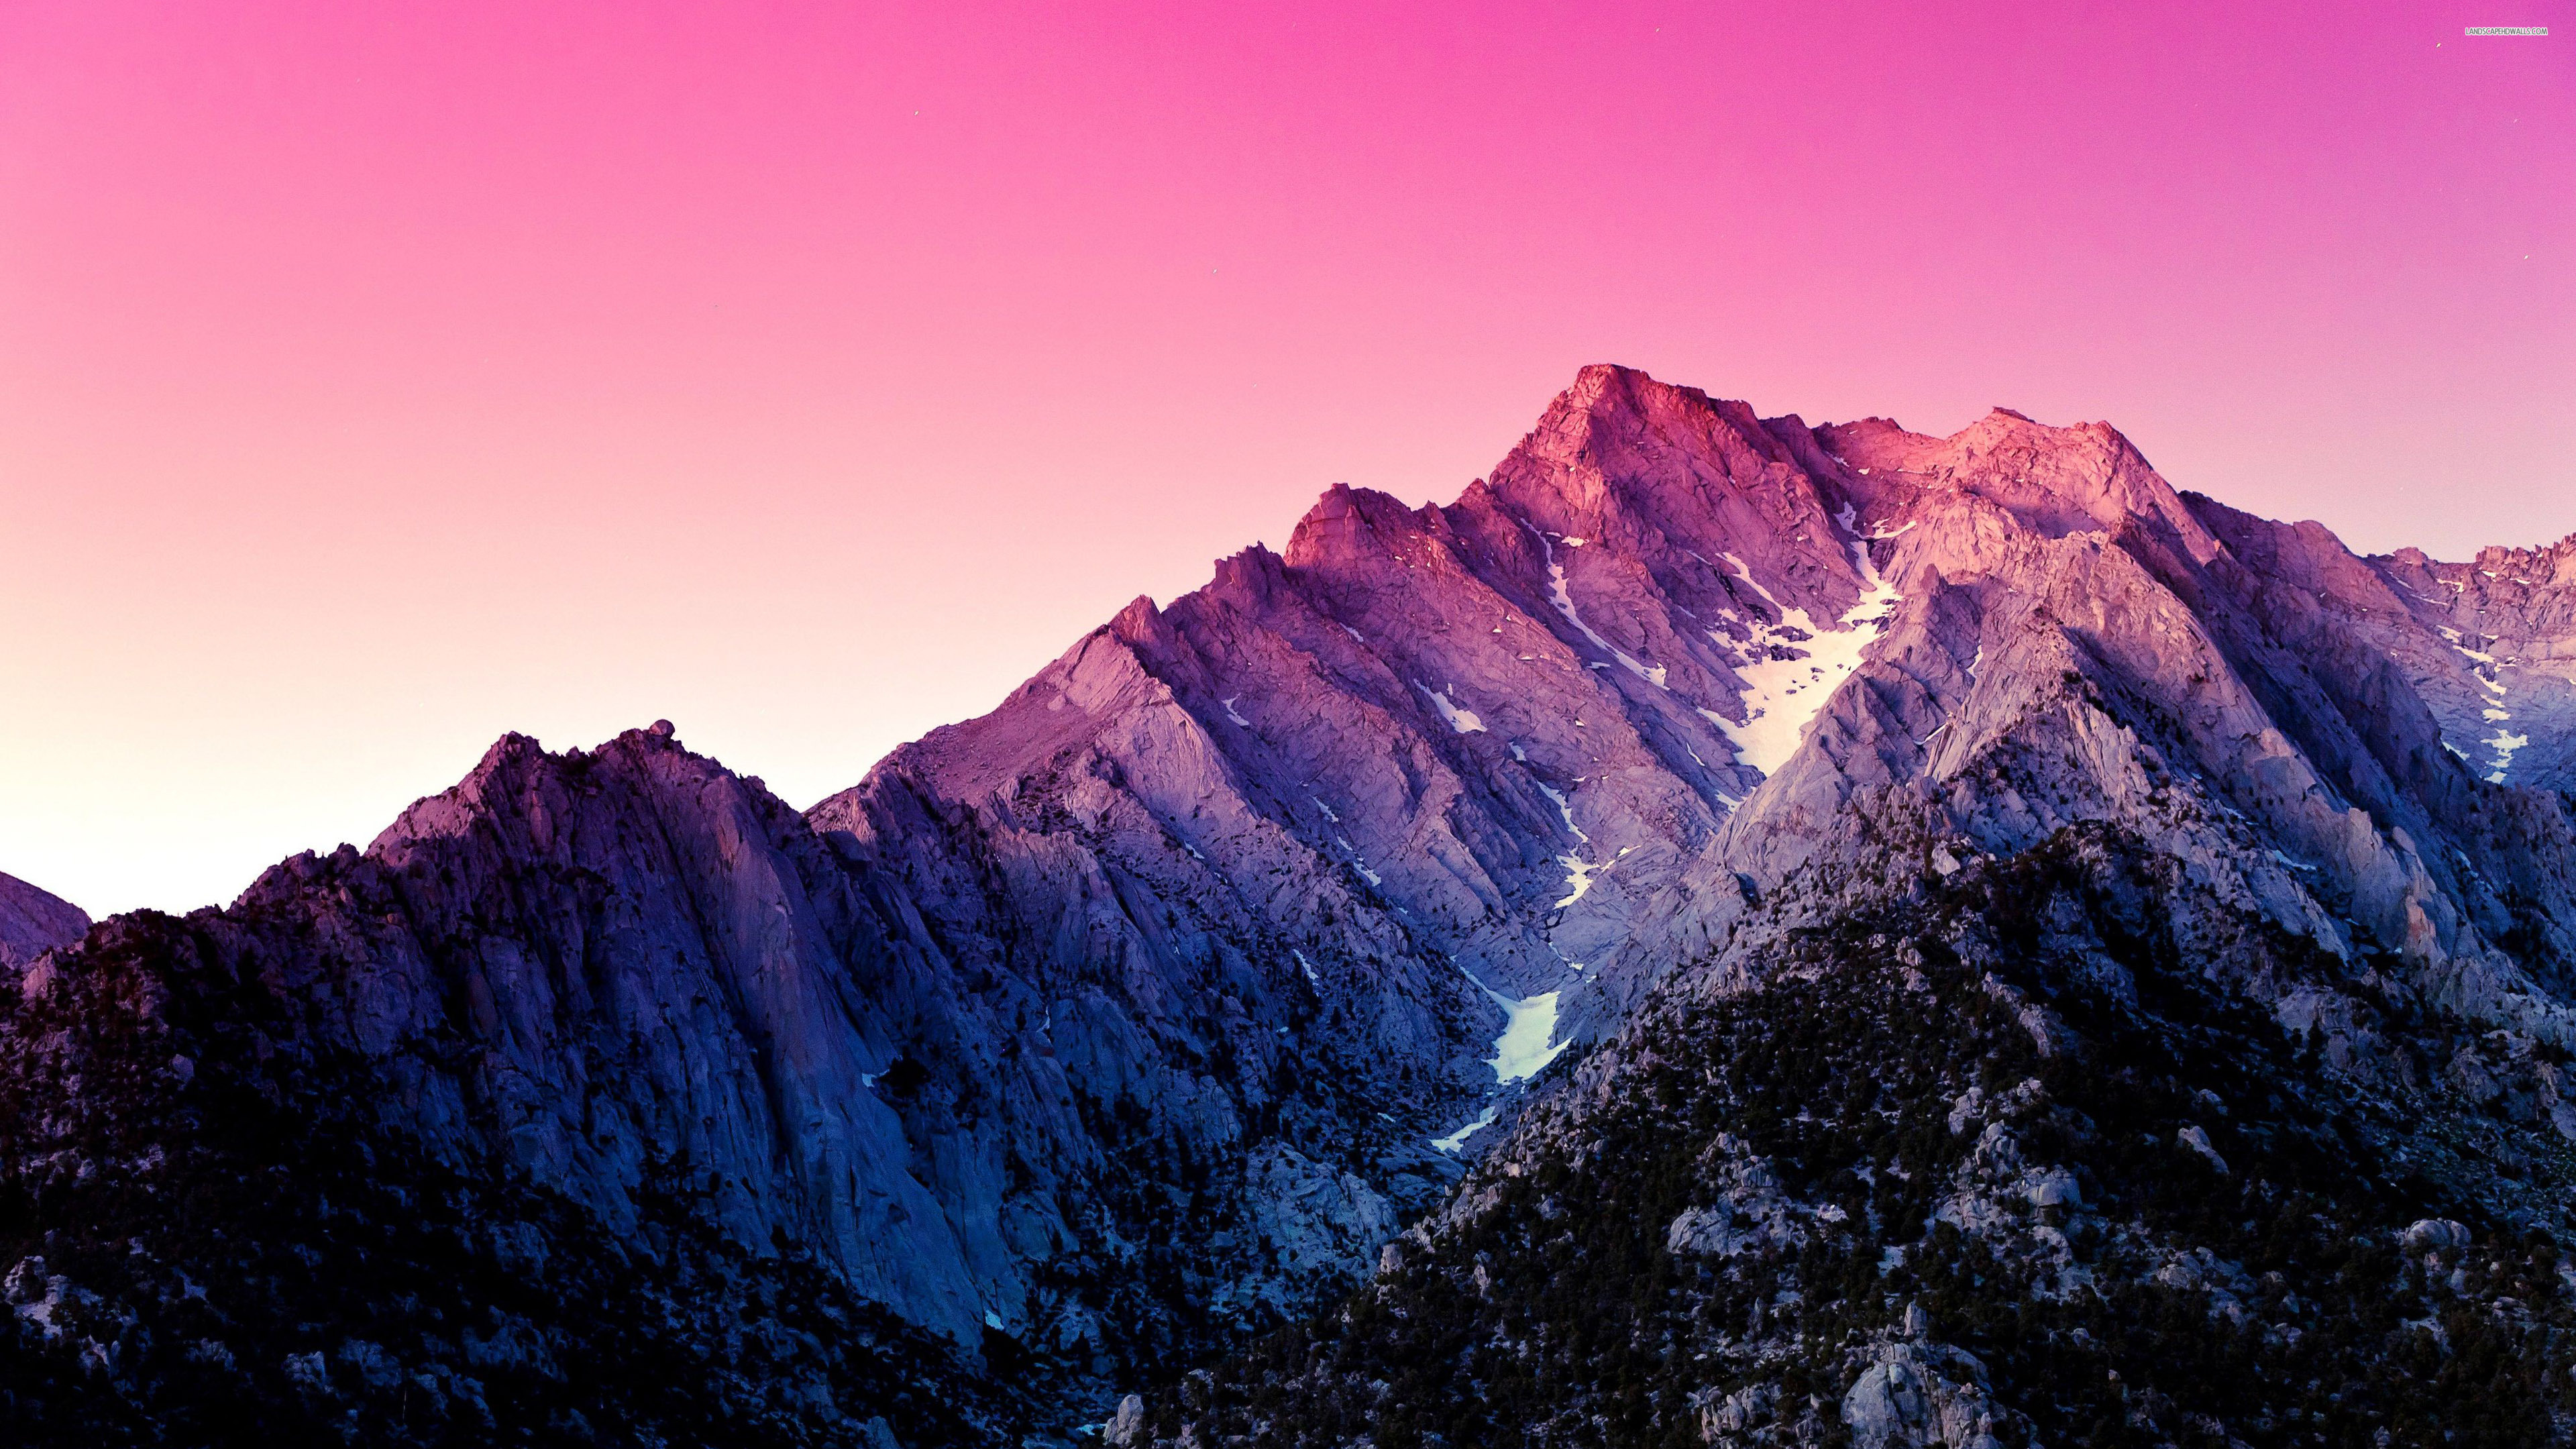 Above The Mountains Wallpaper Wide Screen 1080p 2k 4k